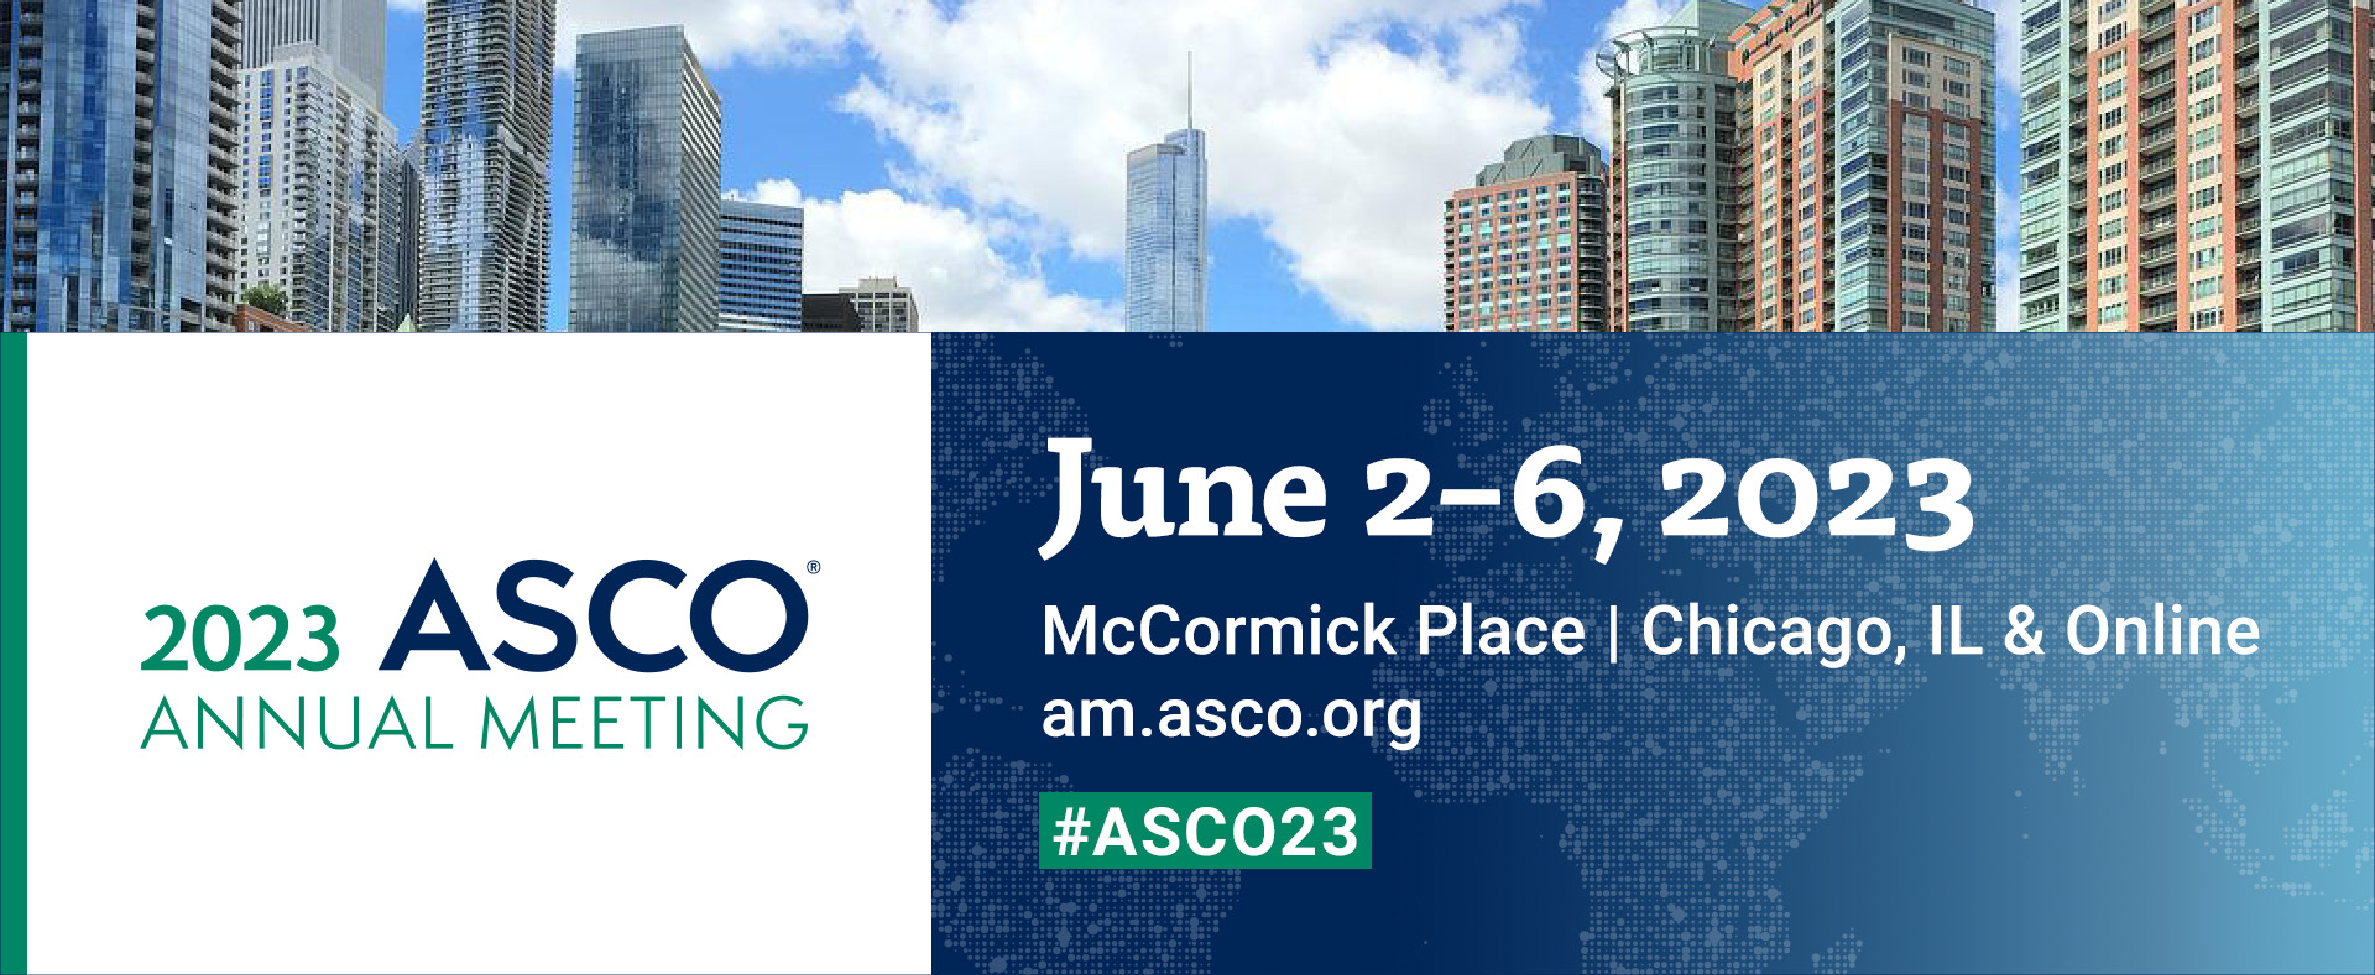 AMERICAN SOCIETY OF CLINICAL ONCOLOGY Annual Meeting - ASCO 2023